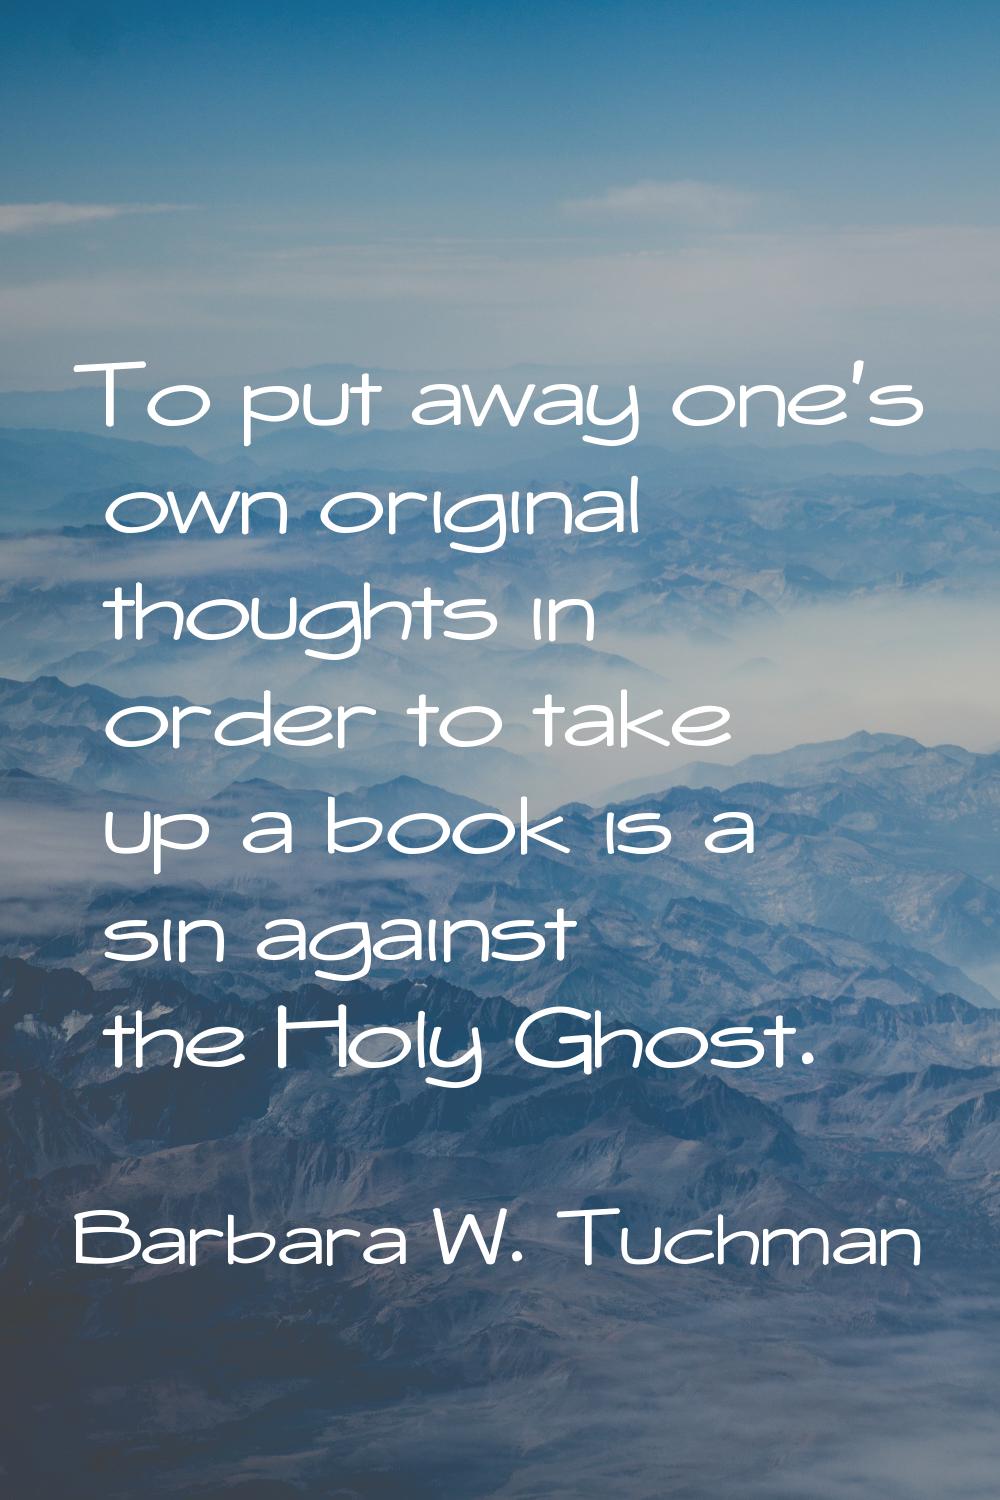 To put away one's own original thoughts in order to take up a book is a sin against the Holy Ghost.